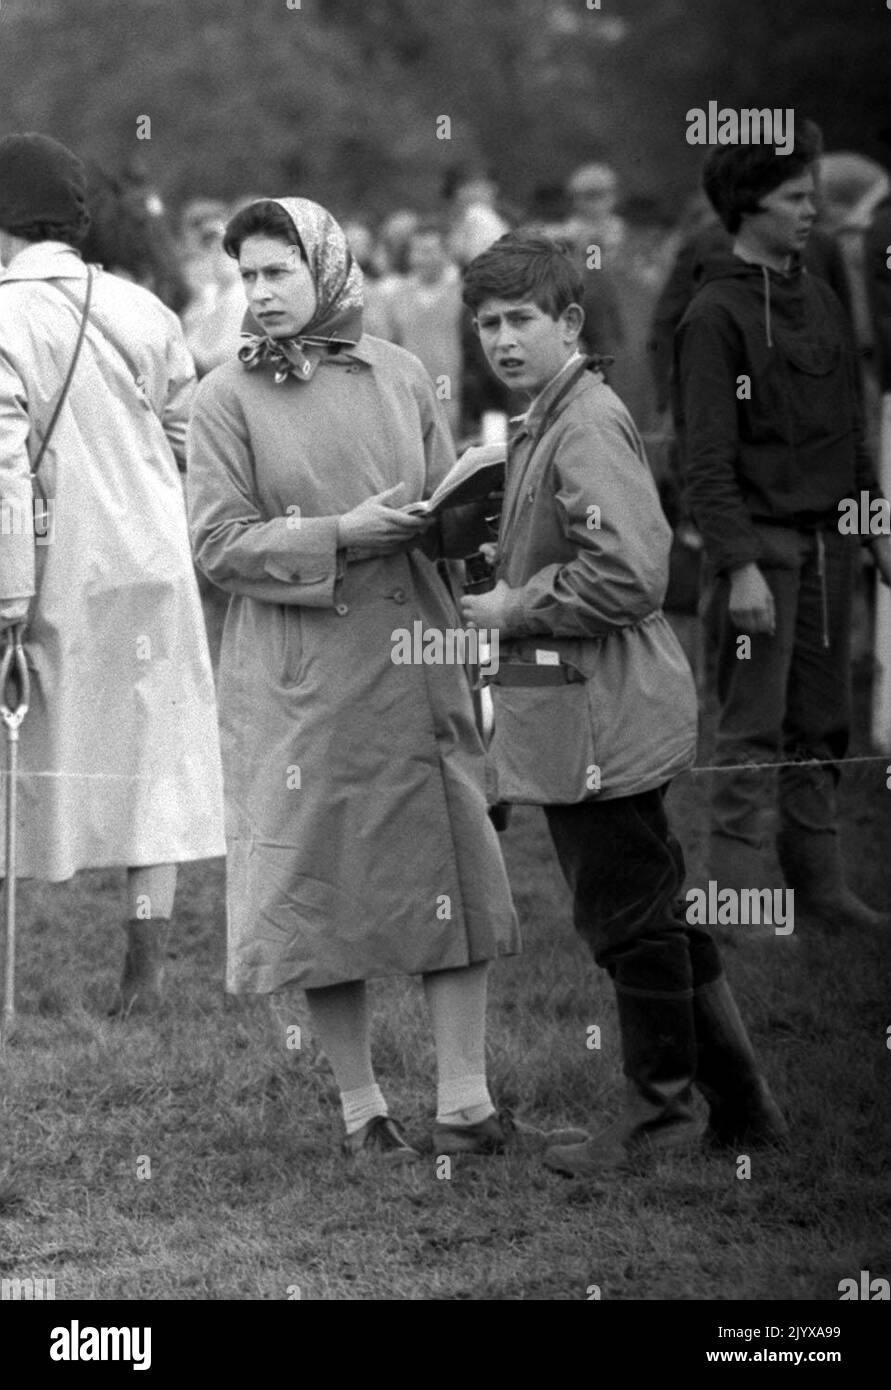 File photo dated 21/4/1961 of Prince Charles (12) with his mother, Queen Elizabeth II, at the three day horse trials at Badminton, Gloucestershire. Being head of state was a full-time job and left the Queen as a young mother with limited time for her children. Nannies were called upon and boarding school was considered essential for the royal youngsters. It was also regarded as a progressive choice at the time and encouraged the Queen's four offspring to mix with children from different backgrounds. Issue date: Thursday September 8, 2022. Stock Photo